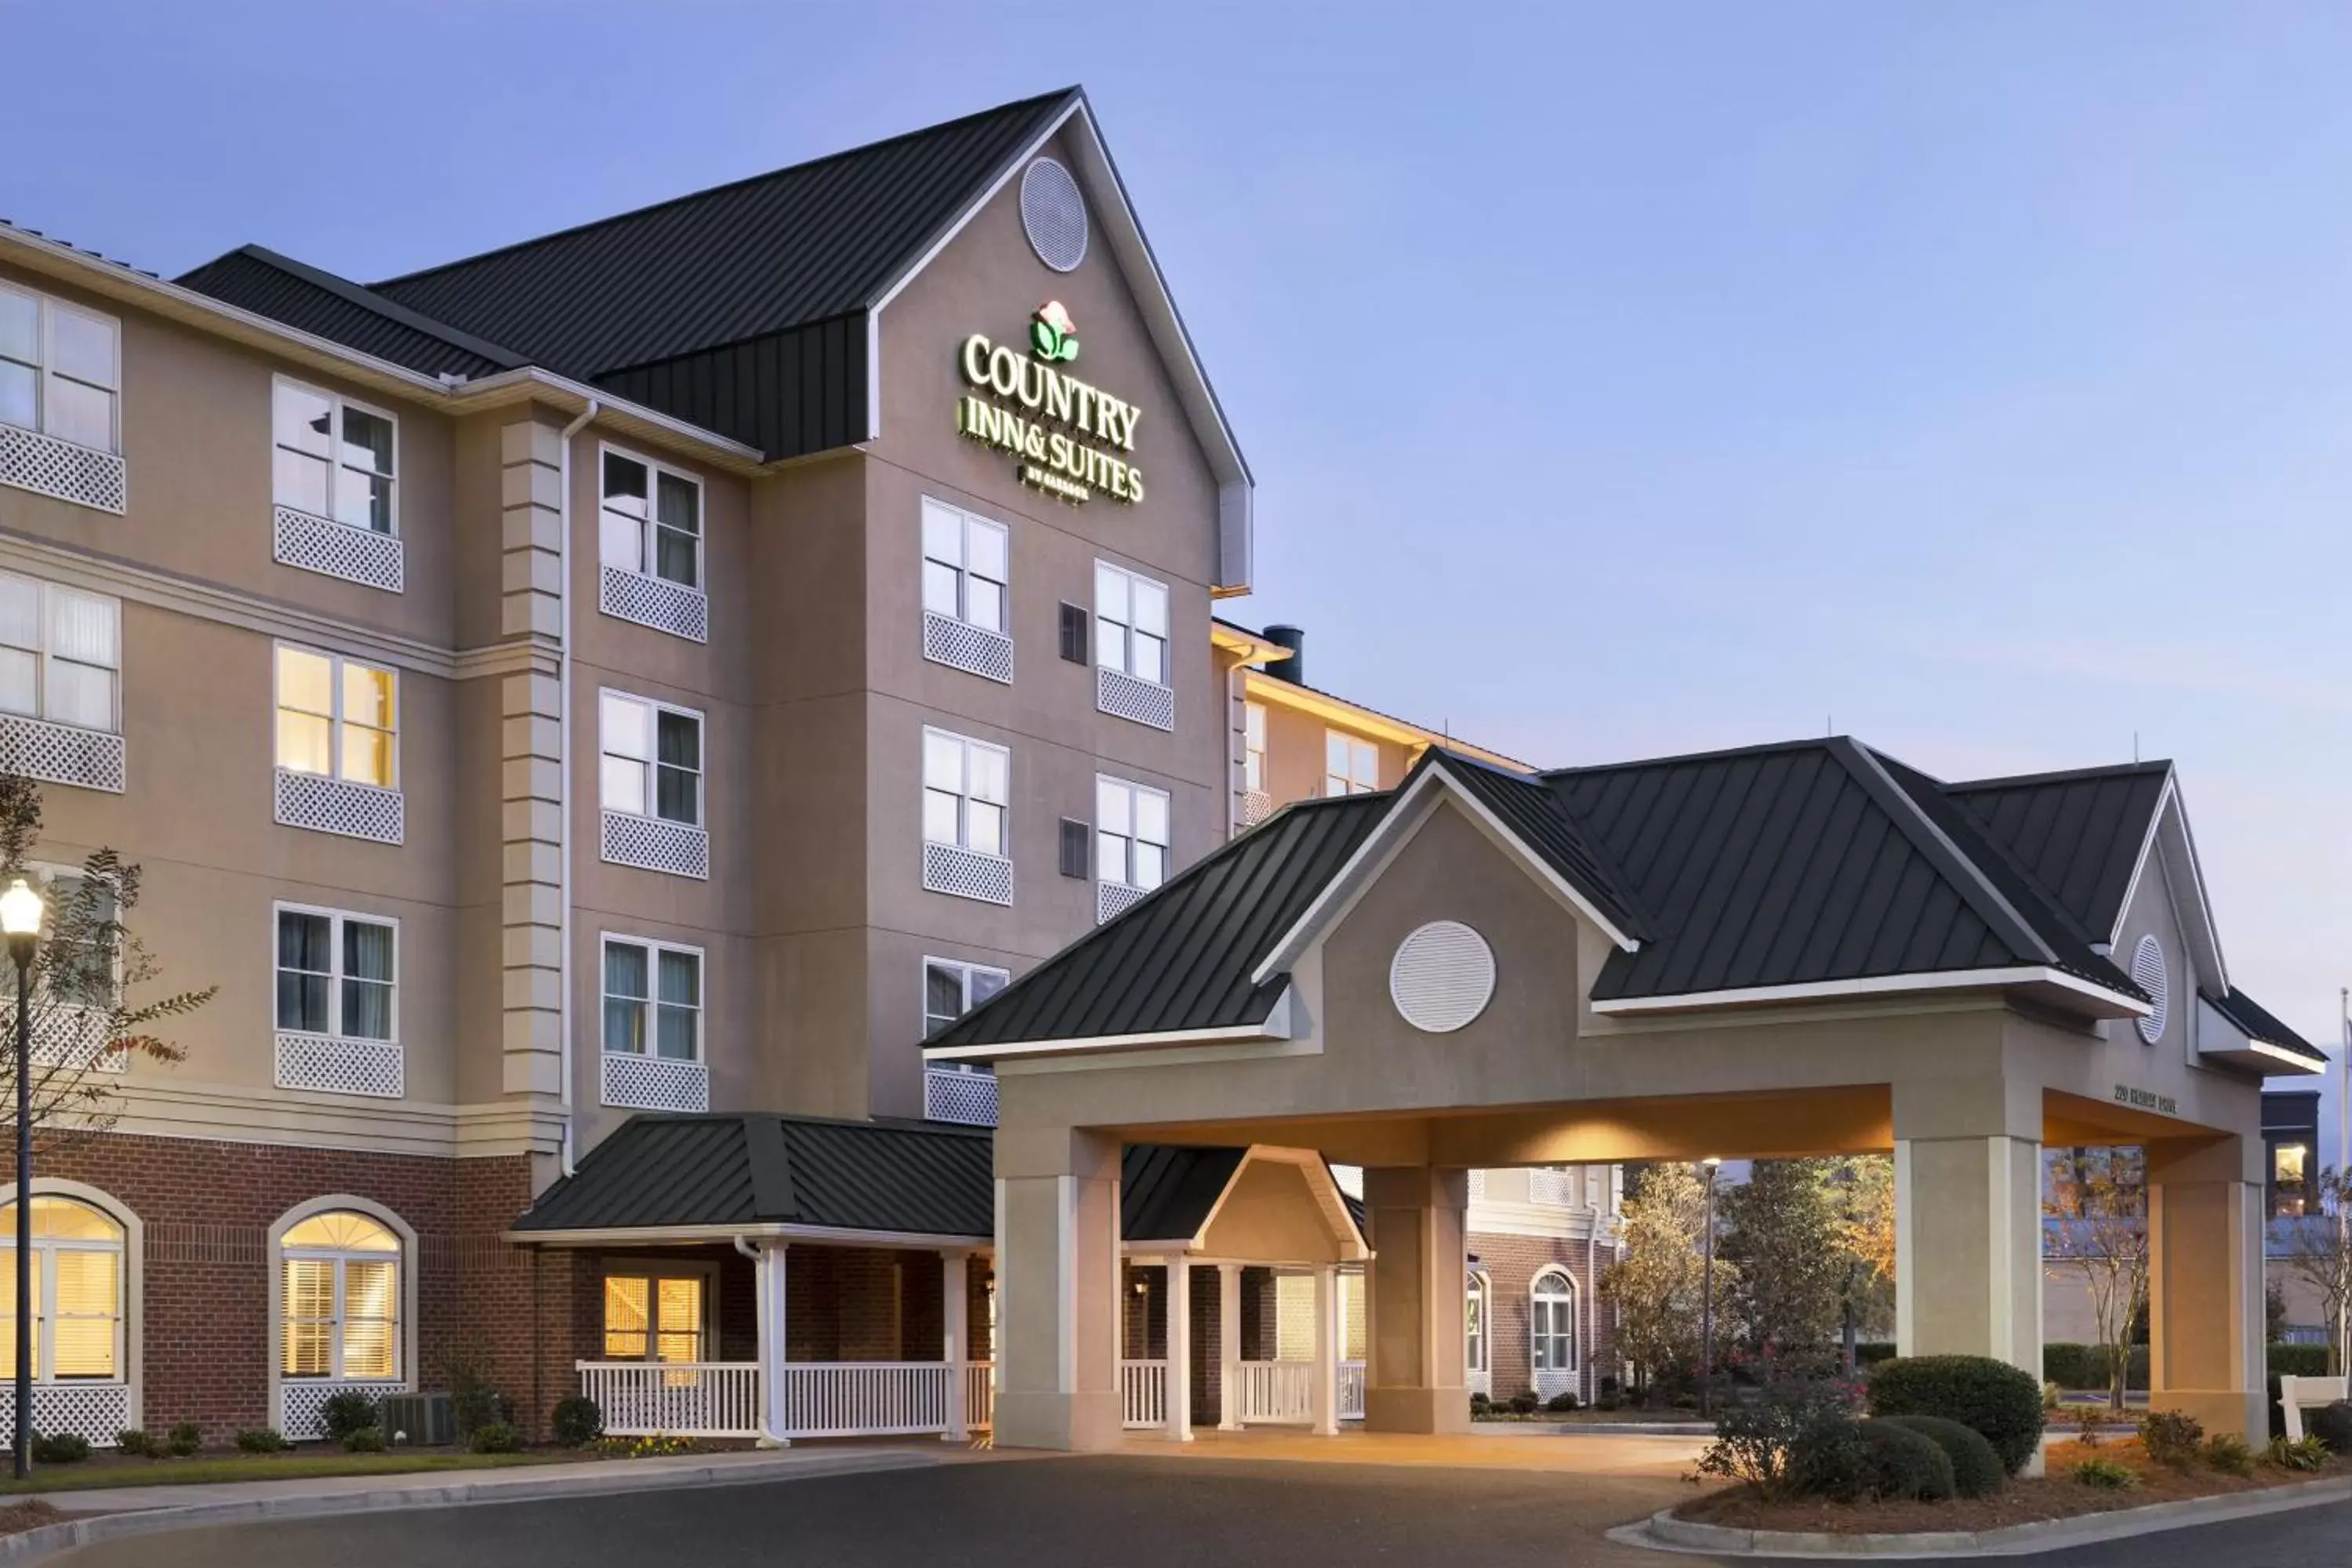 Facade/entrance, Property Building in Country Inn & Suites by Radisson, Summerville, SC